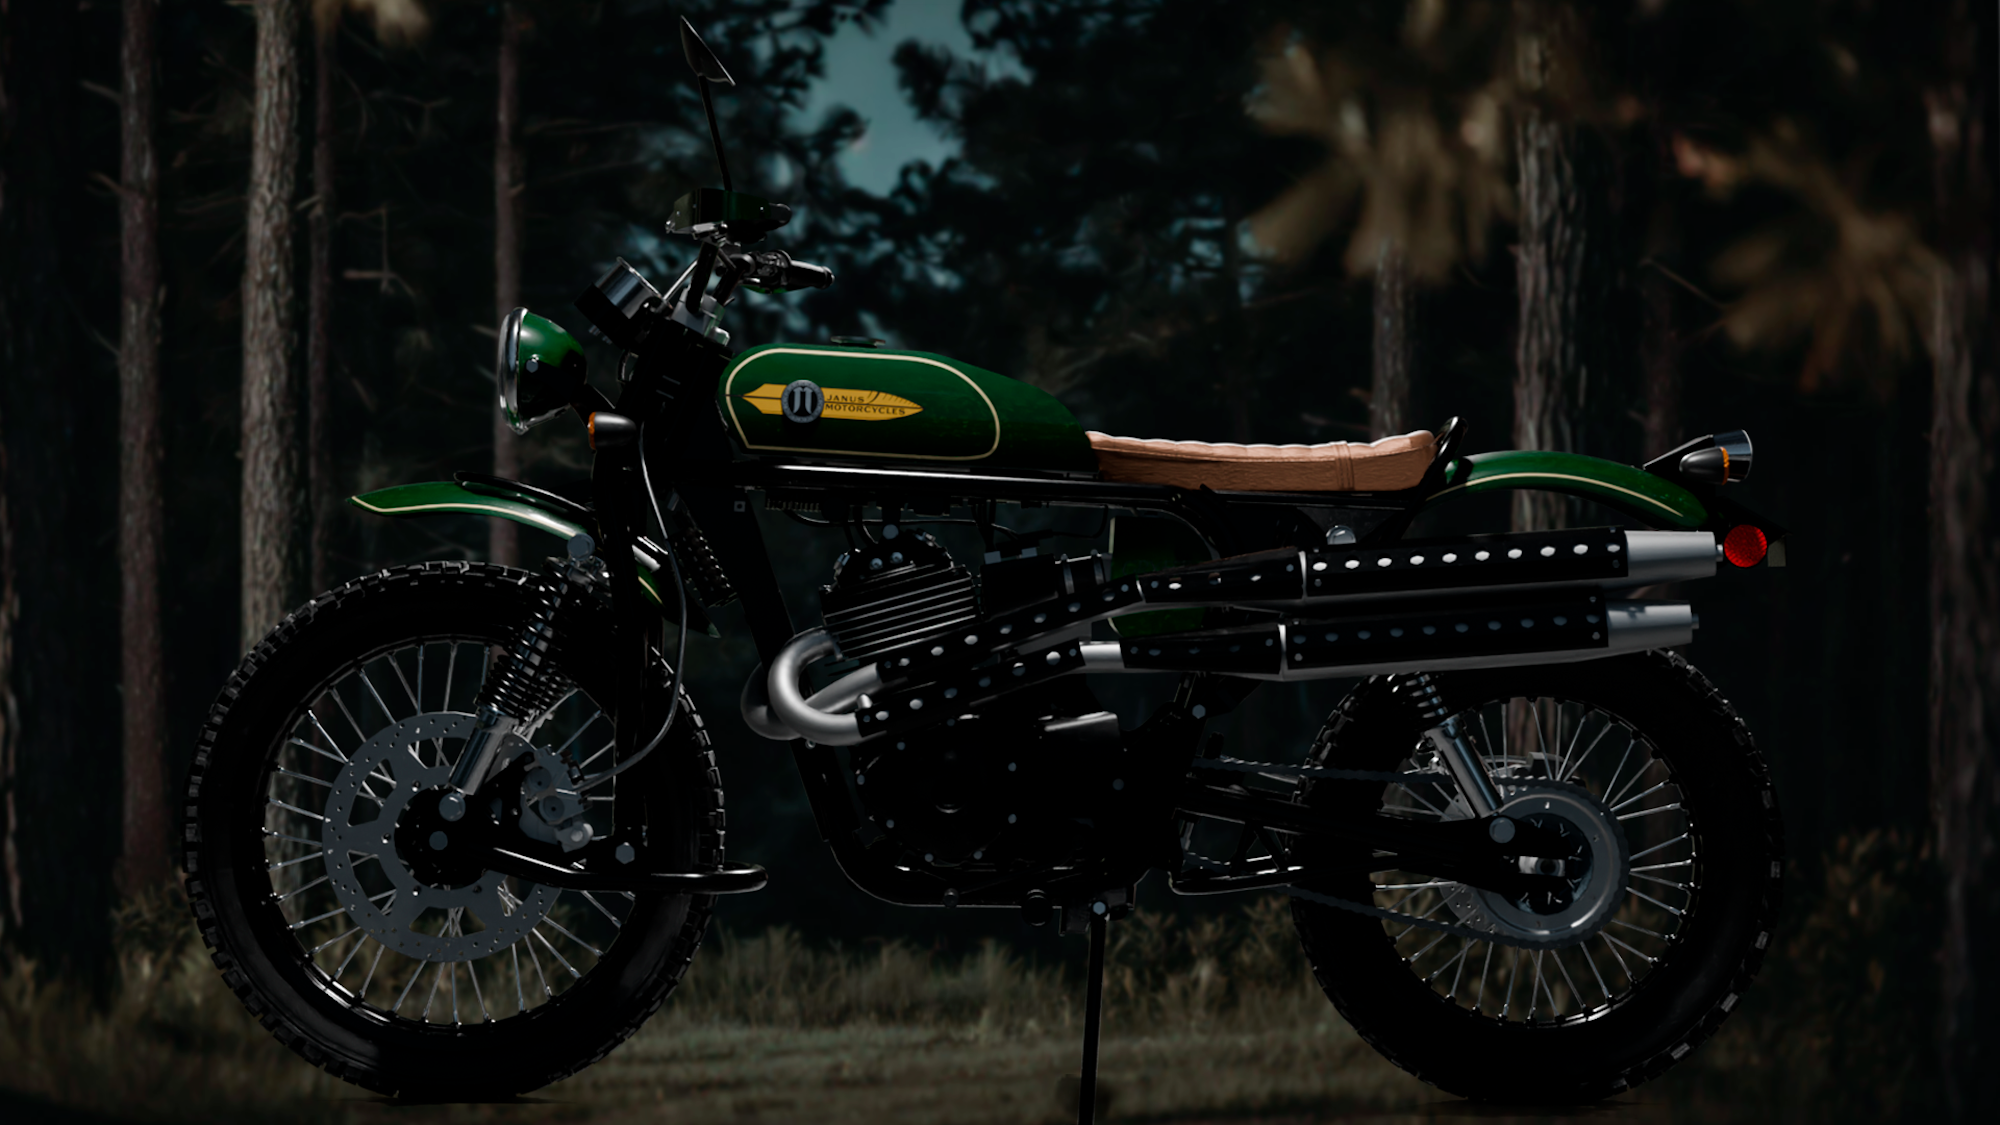 A scrambler motorcycle in the woods.